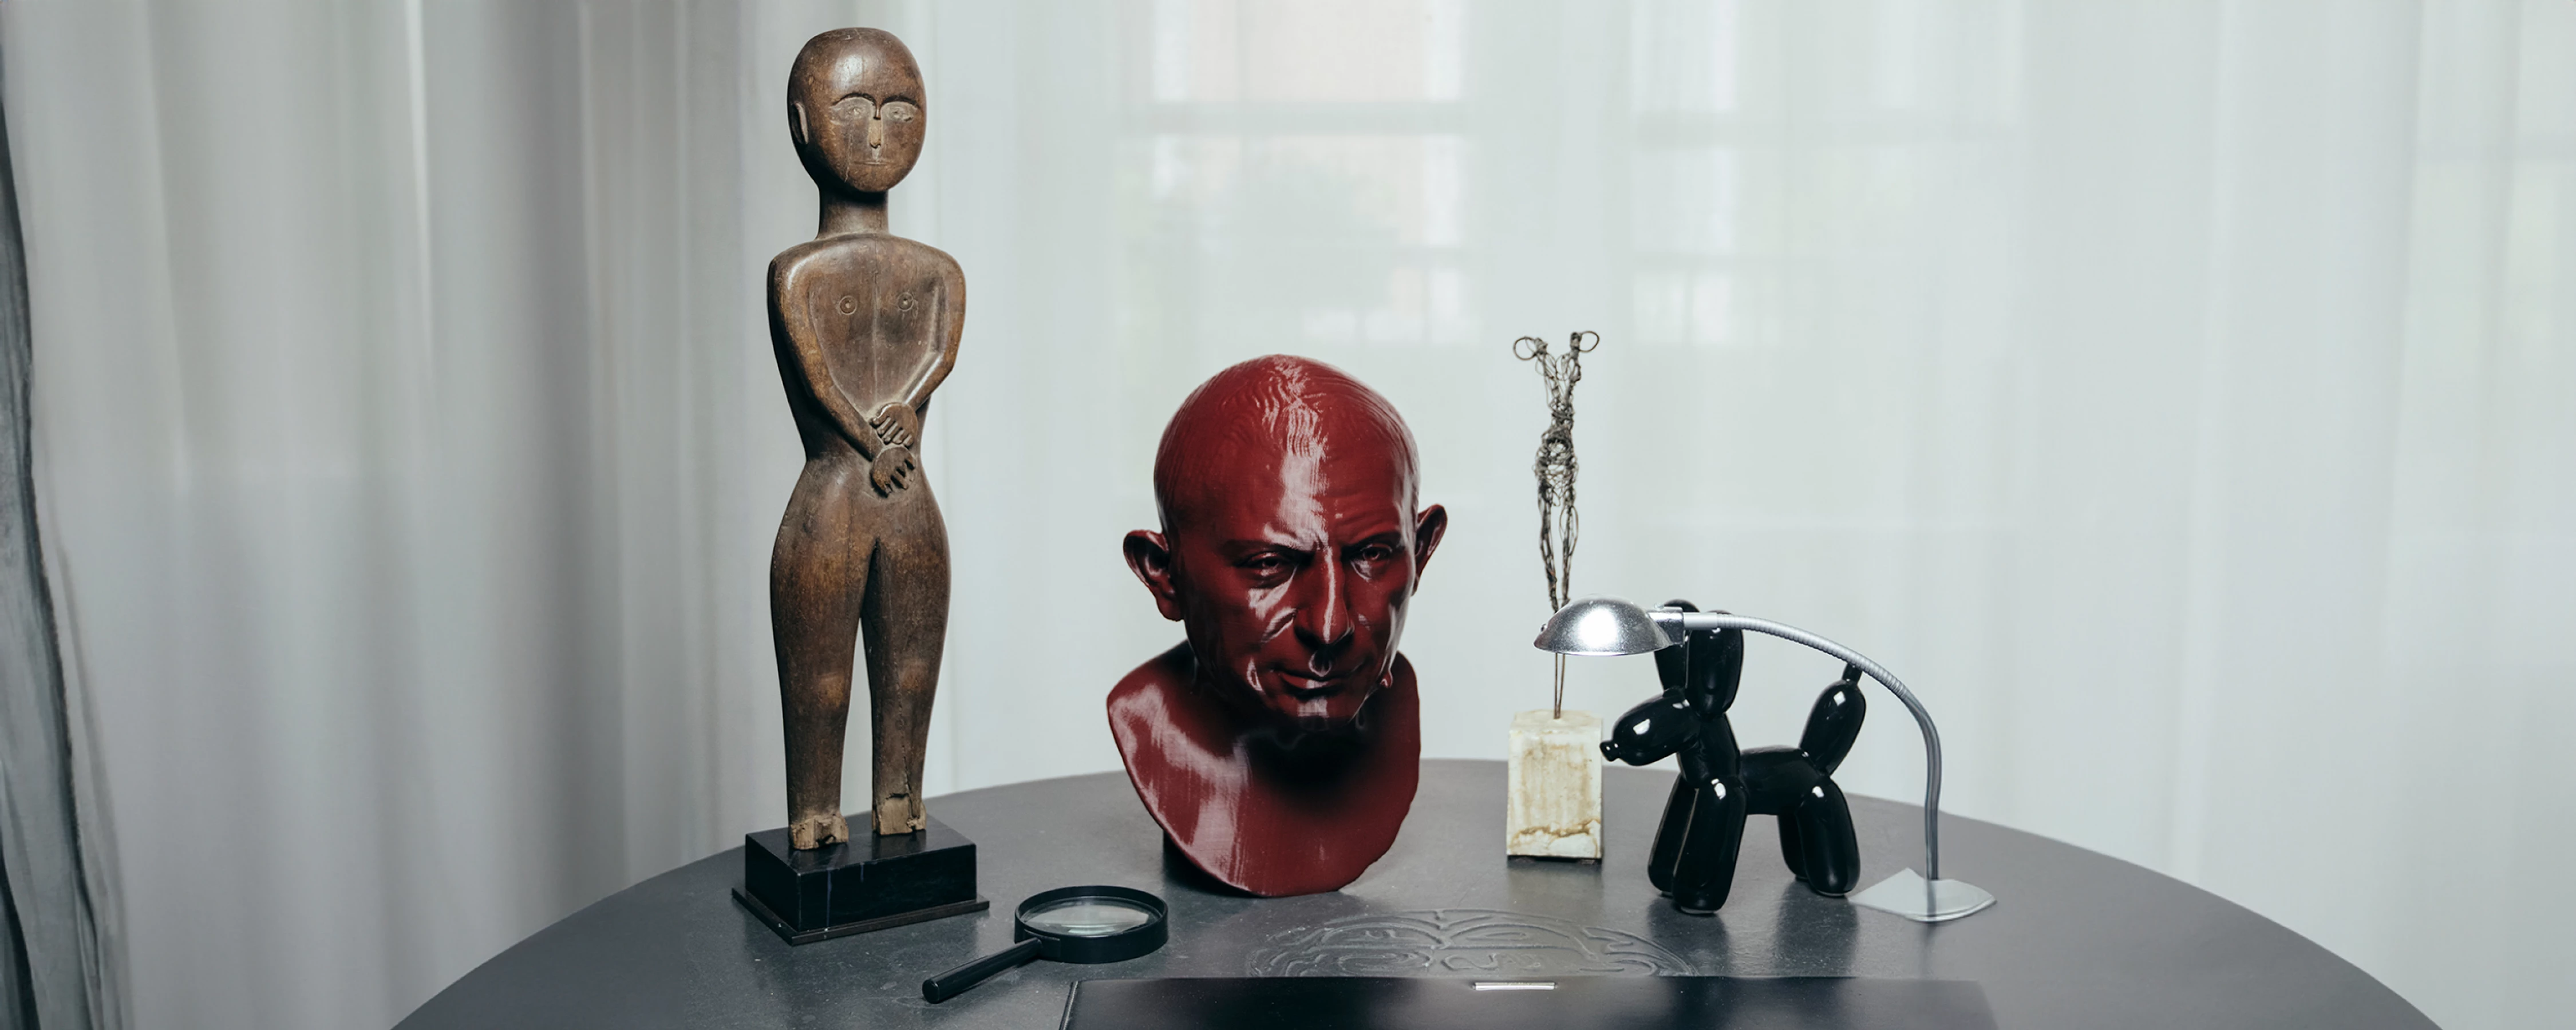 “Lucius Caecilius Iucundus” by Unidentified Sculptors  from the Private Collections collection